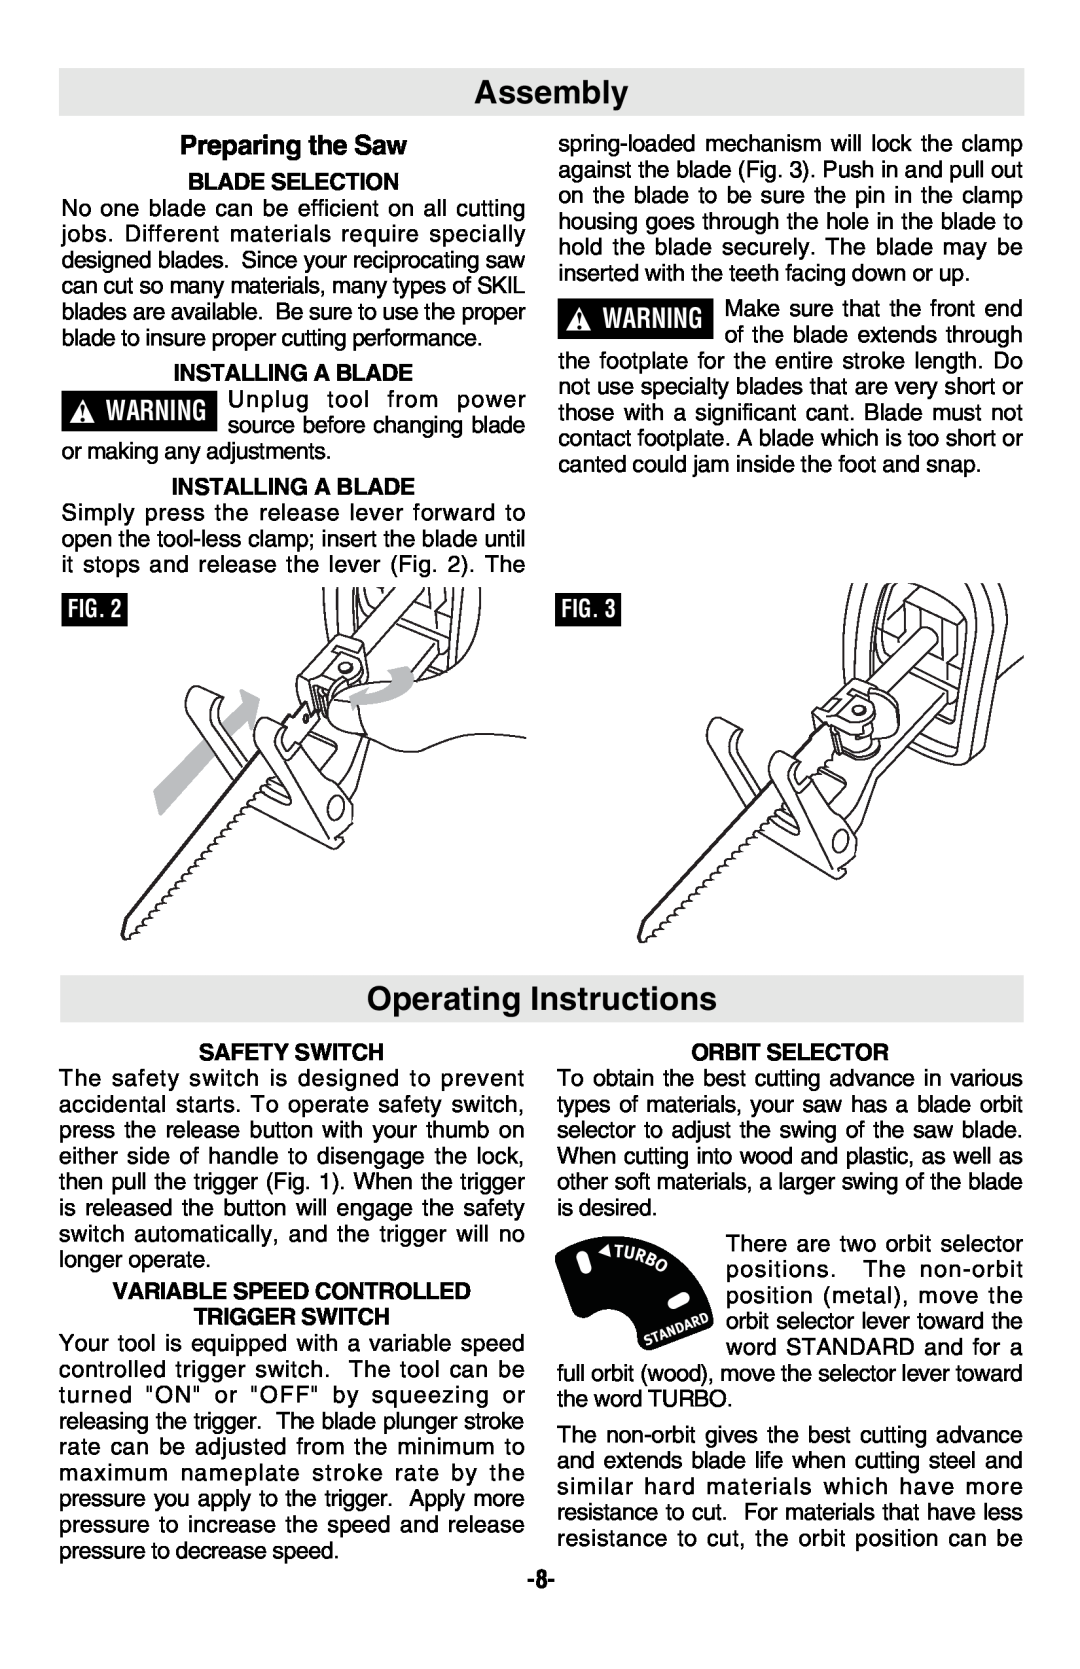 Skil 9350 manual Assembly, Operating Instructions, Preparing the Saw 